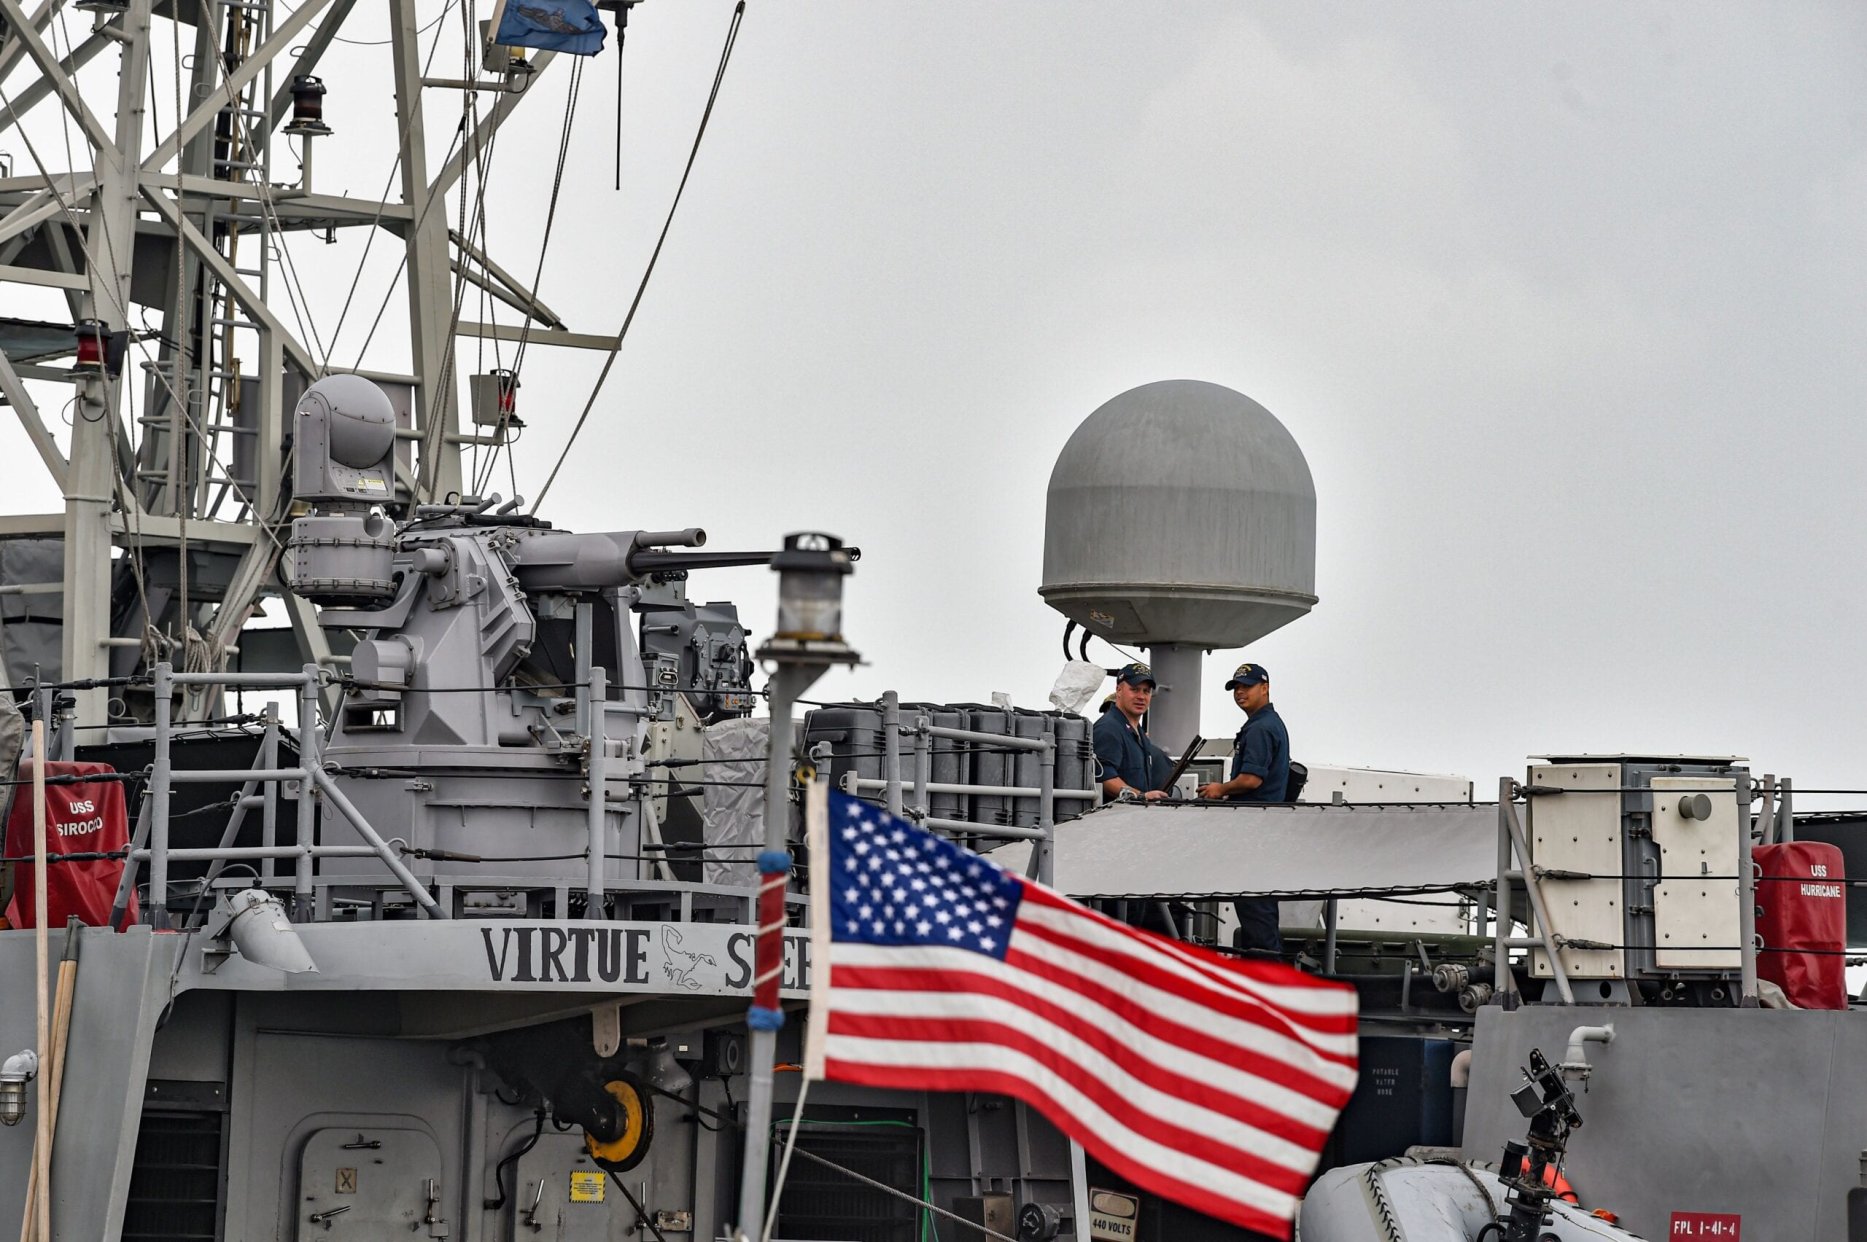 US Navy sailors stand guard aboard the USS Sirocco patrol ship